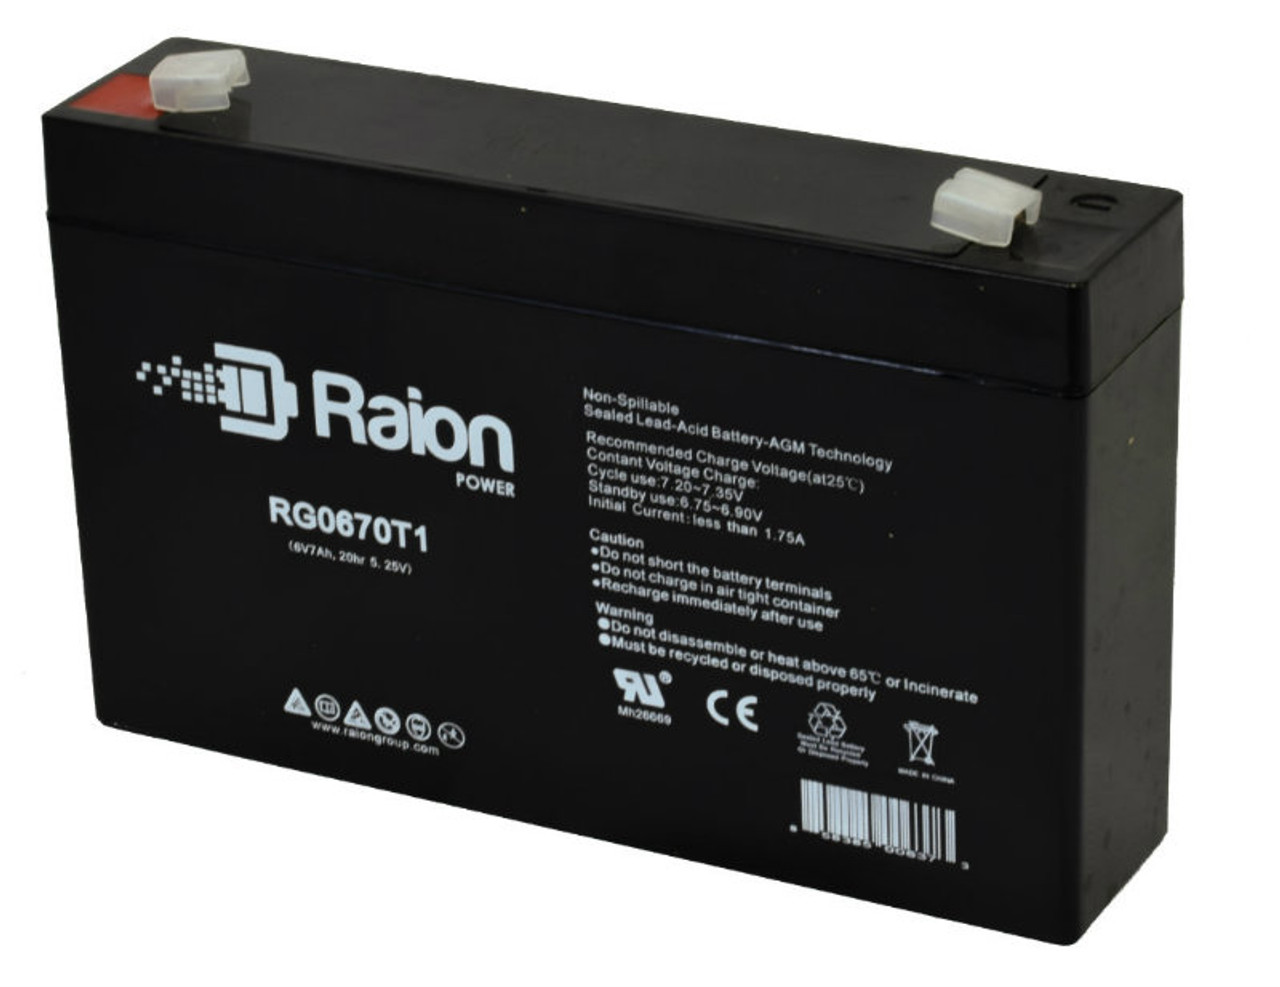 Raion Power 6V 7Ah Replacement Ride-On Toy Battery Cartridge for Kid Motorz 0971 Super Quad